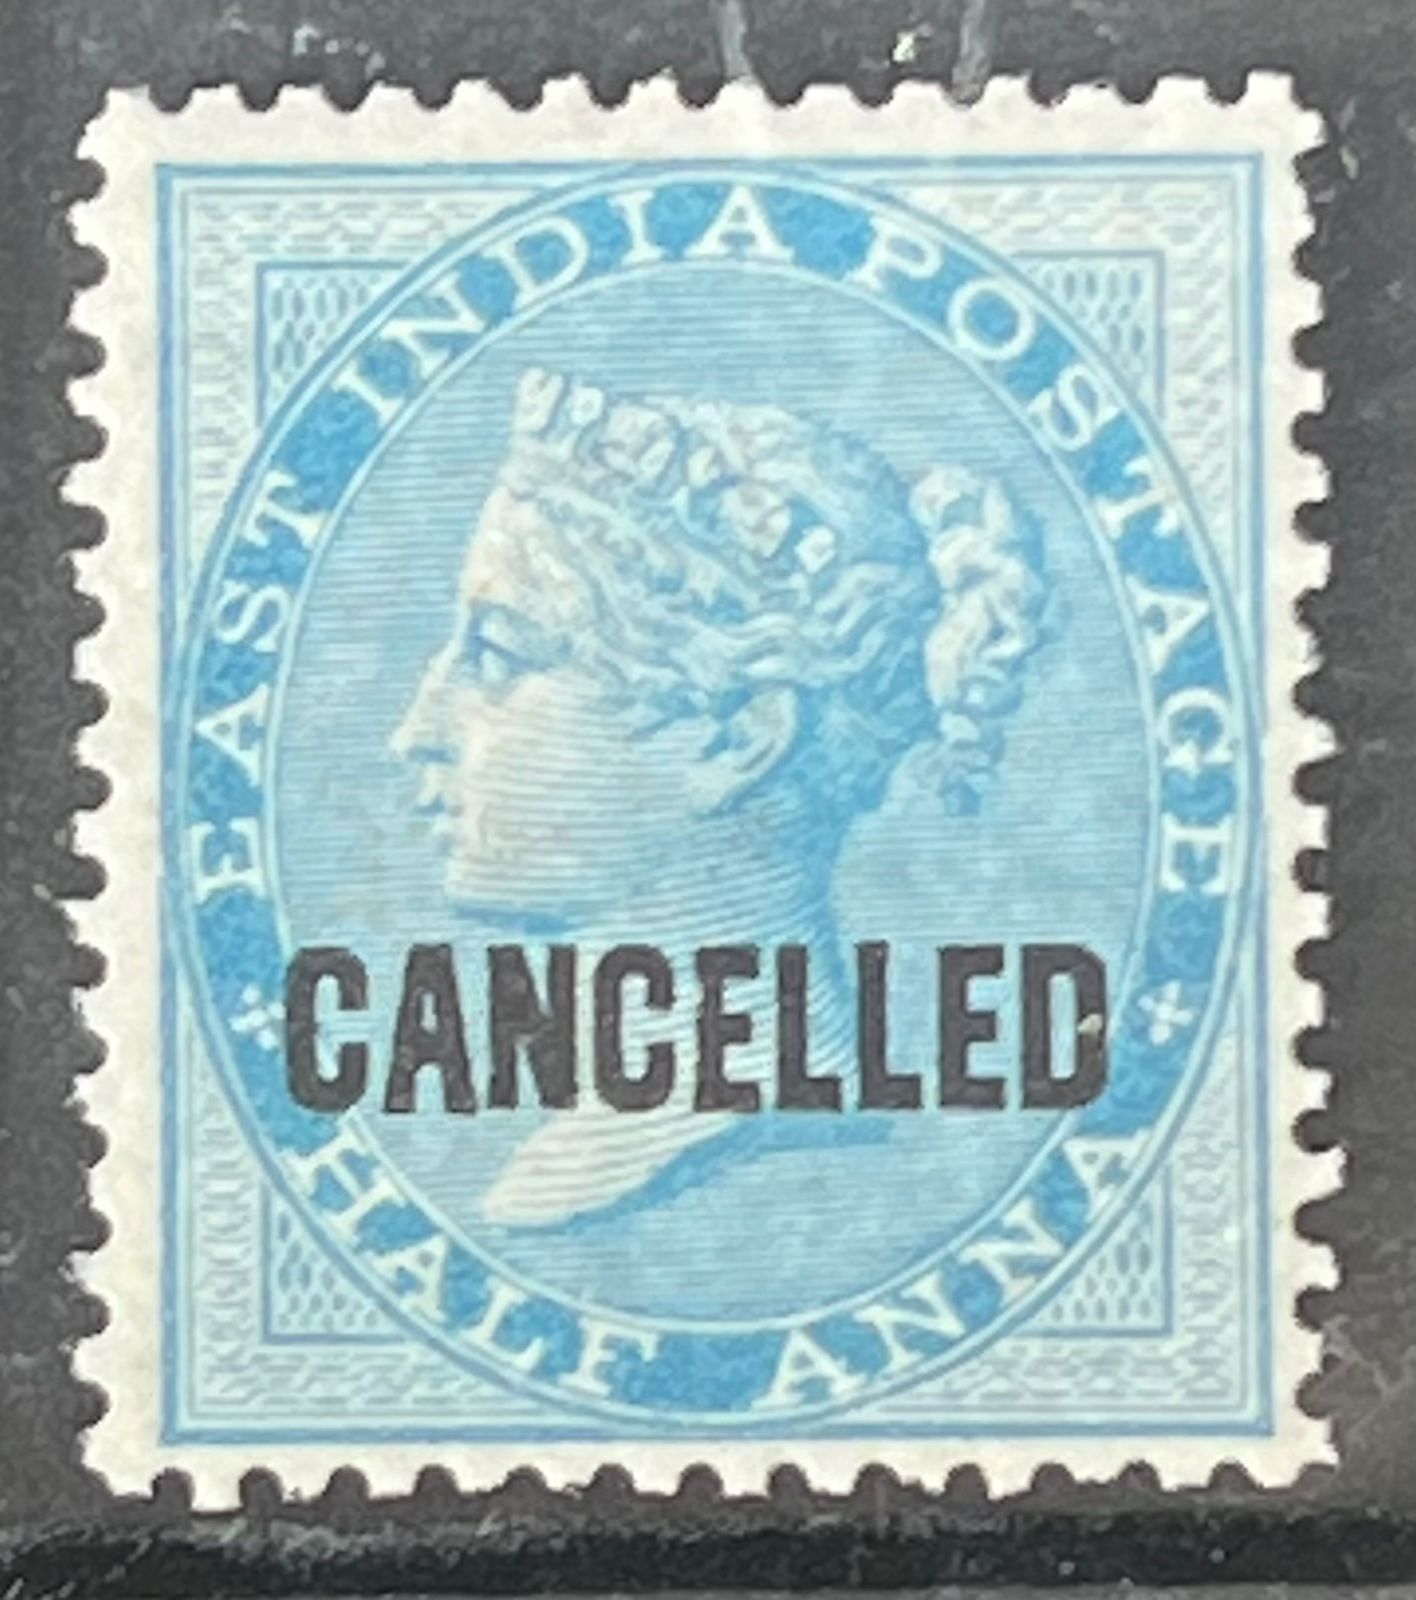 India 1865 QV East India Co 12a CANCELLED Overprint Scarce